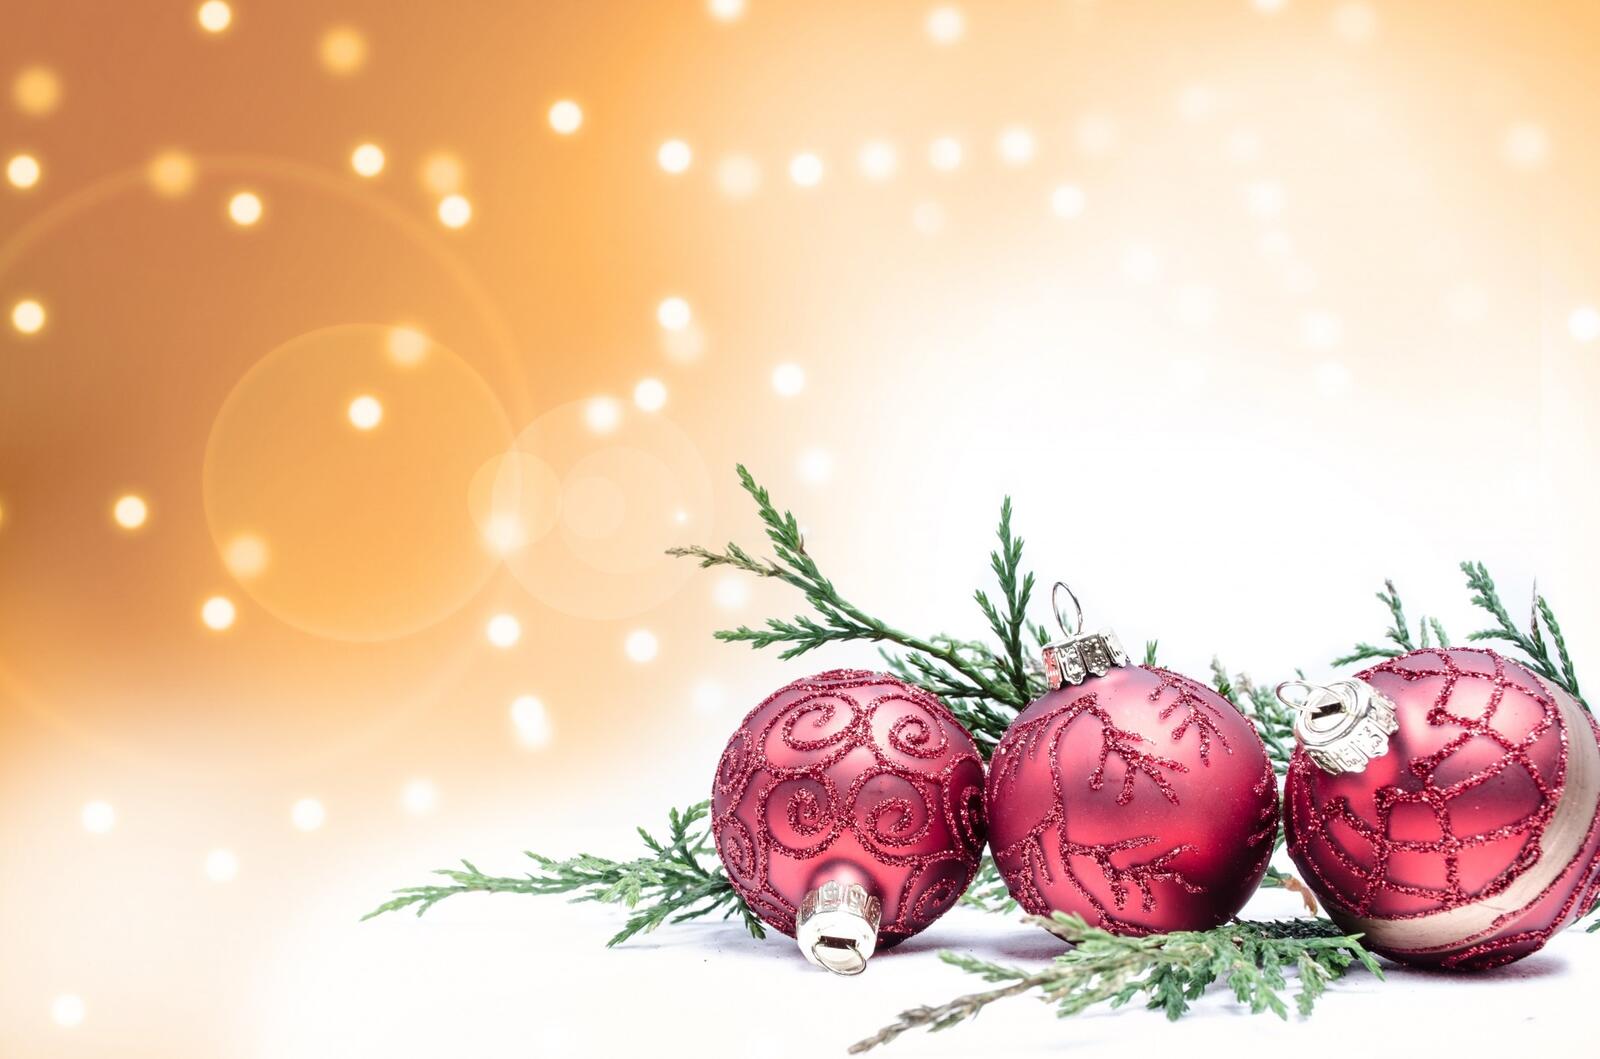 Wallpapers christmas free images decoration on the desktop